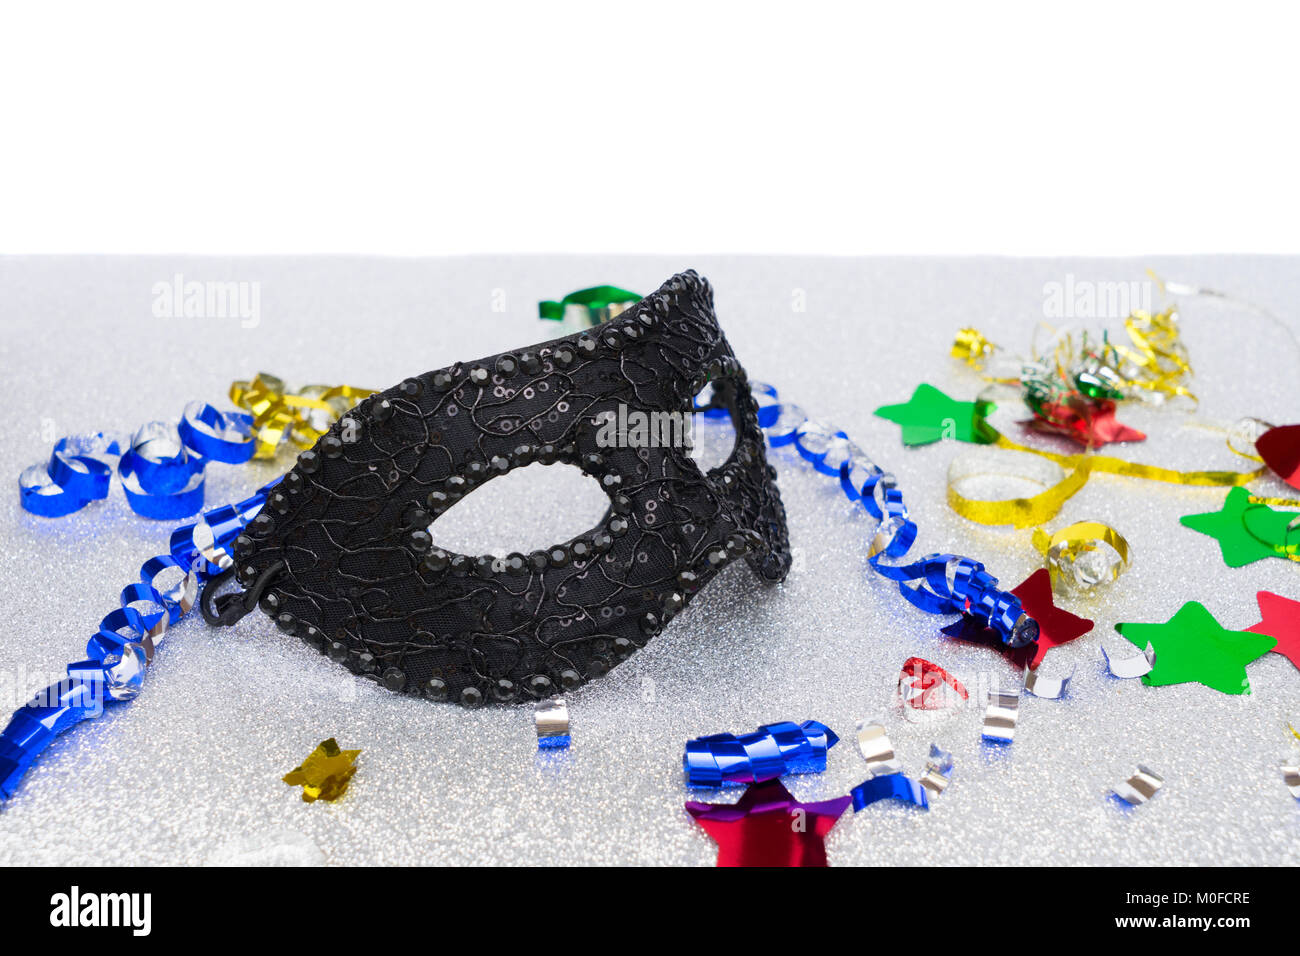 Mask with masquerade decorations Stock Photo - Alamy